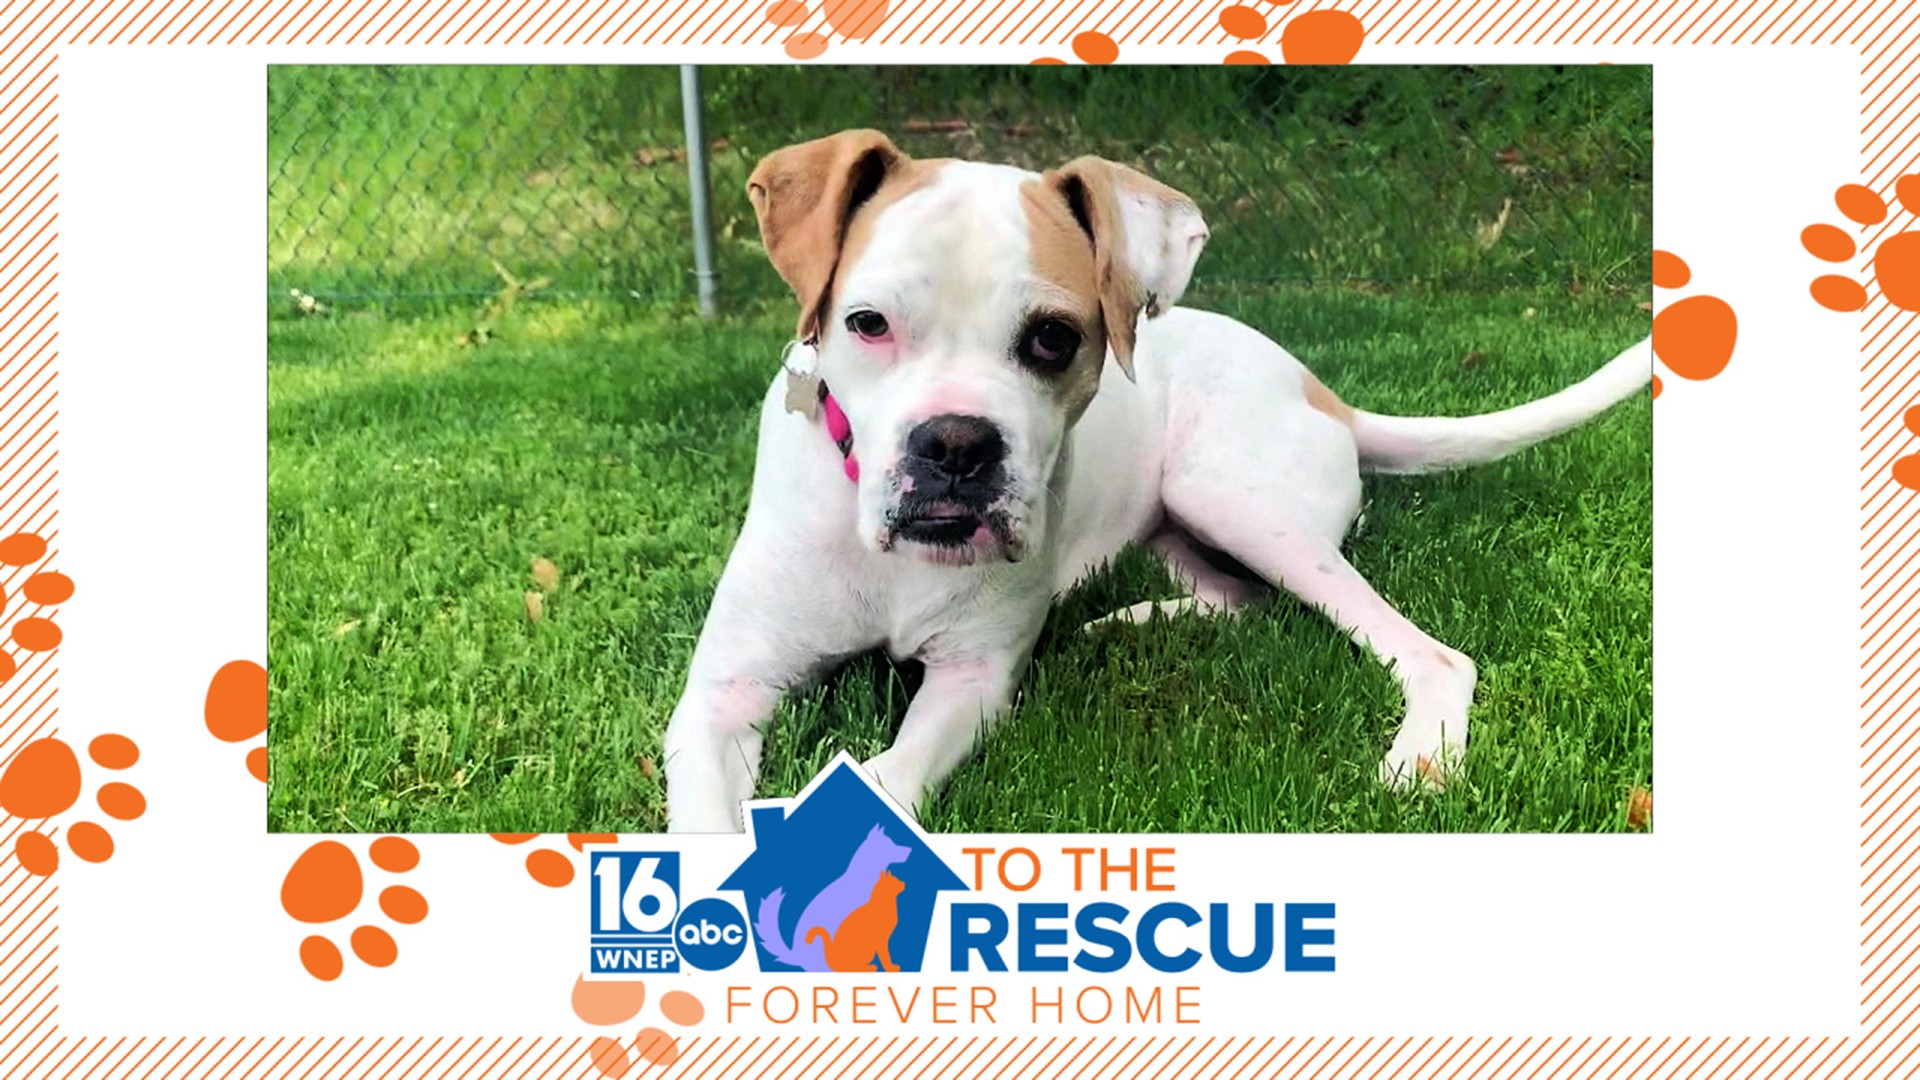 We say all roads lead to NEPA, but this pup's story started an ocean away in Turkey. In this week's 16 To the Rescue, we meet Ayla, who is excited to make our area.